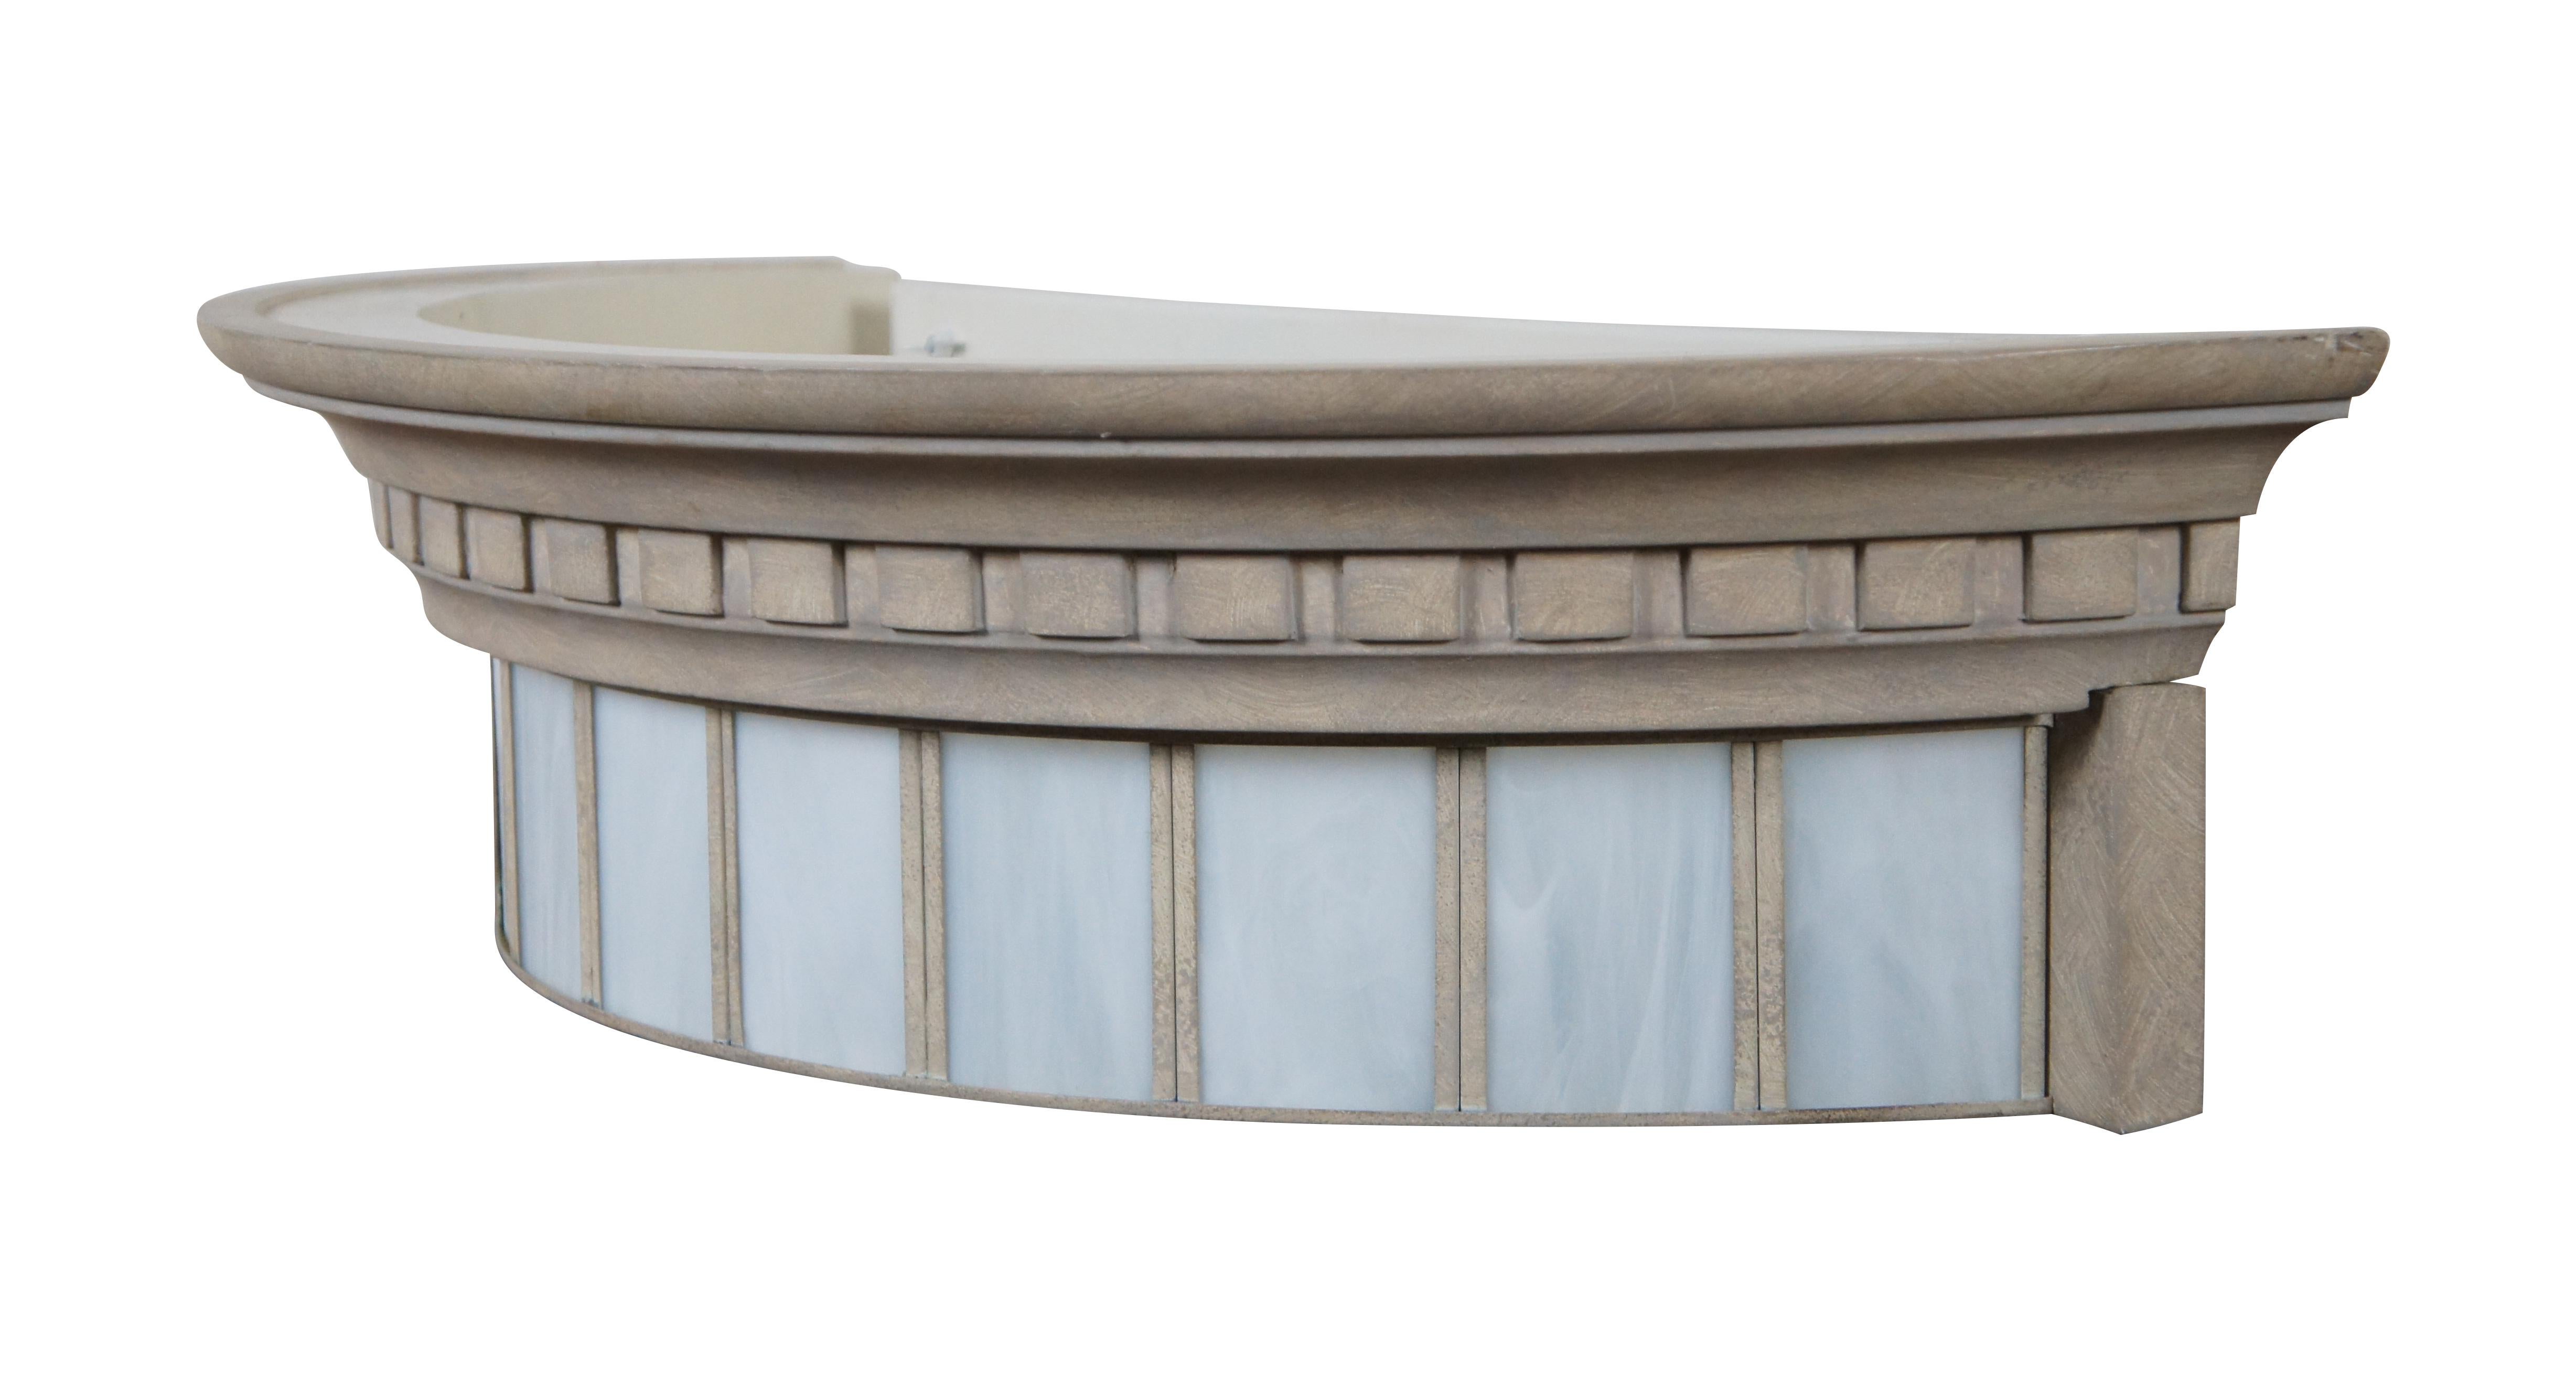 Vintage modern / contemporary wall sconce featuring Grecian style capital / column with half round form and five lights with slag glass panels.

Dimensions:
29” x 12.75” x 7” (Width x Depth x Height)